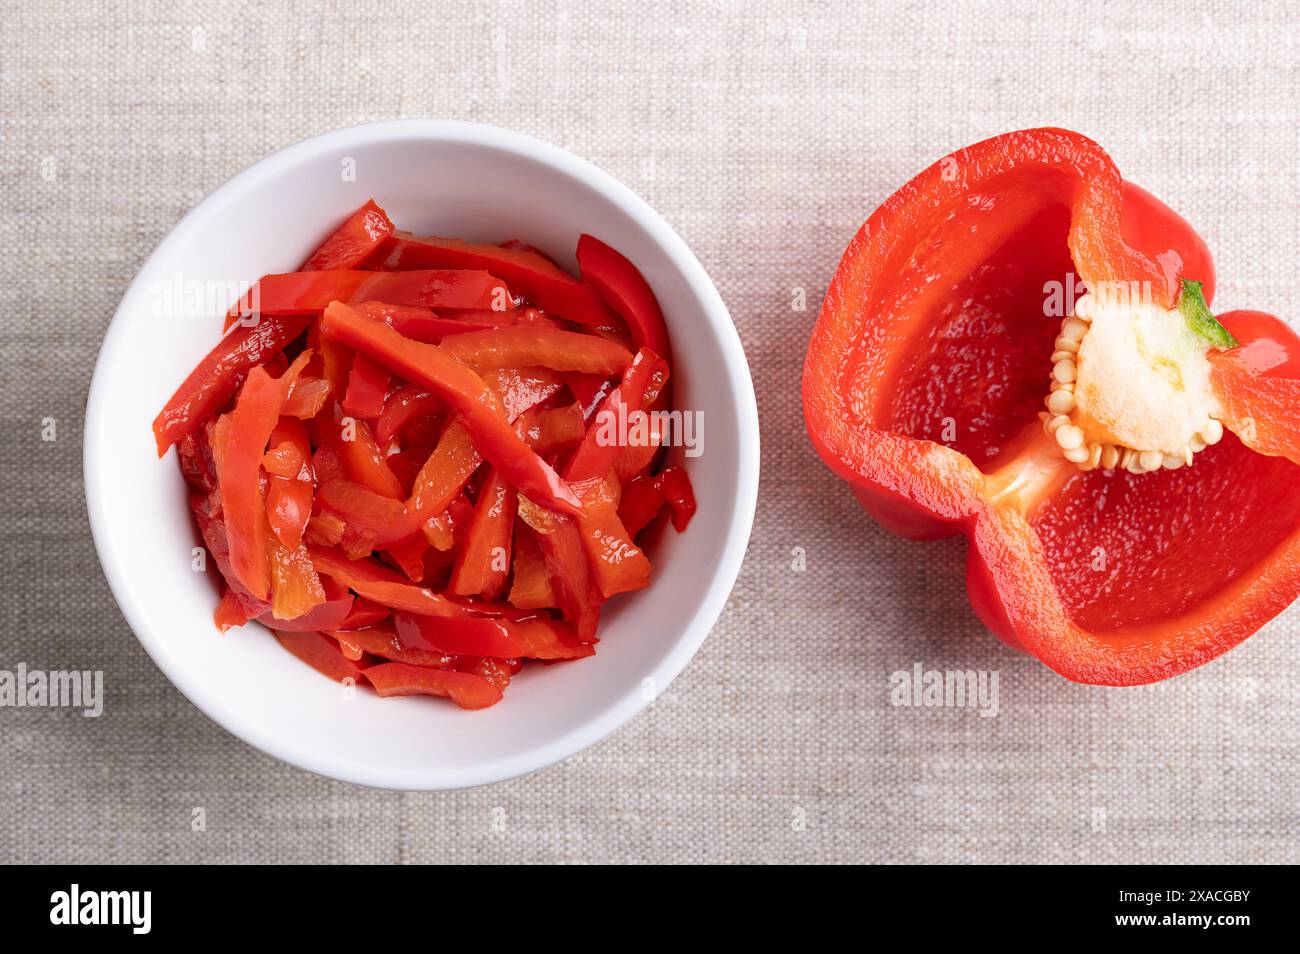 Red pepper salad, pickled red bell pepper strips in a white bowl on linen fabric. Paprika salad, made of sliced, sweet peppers. Stock Photo